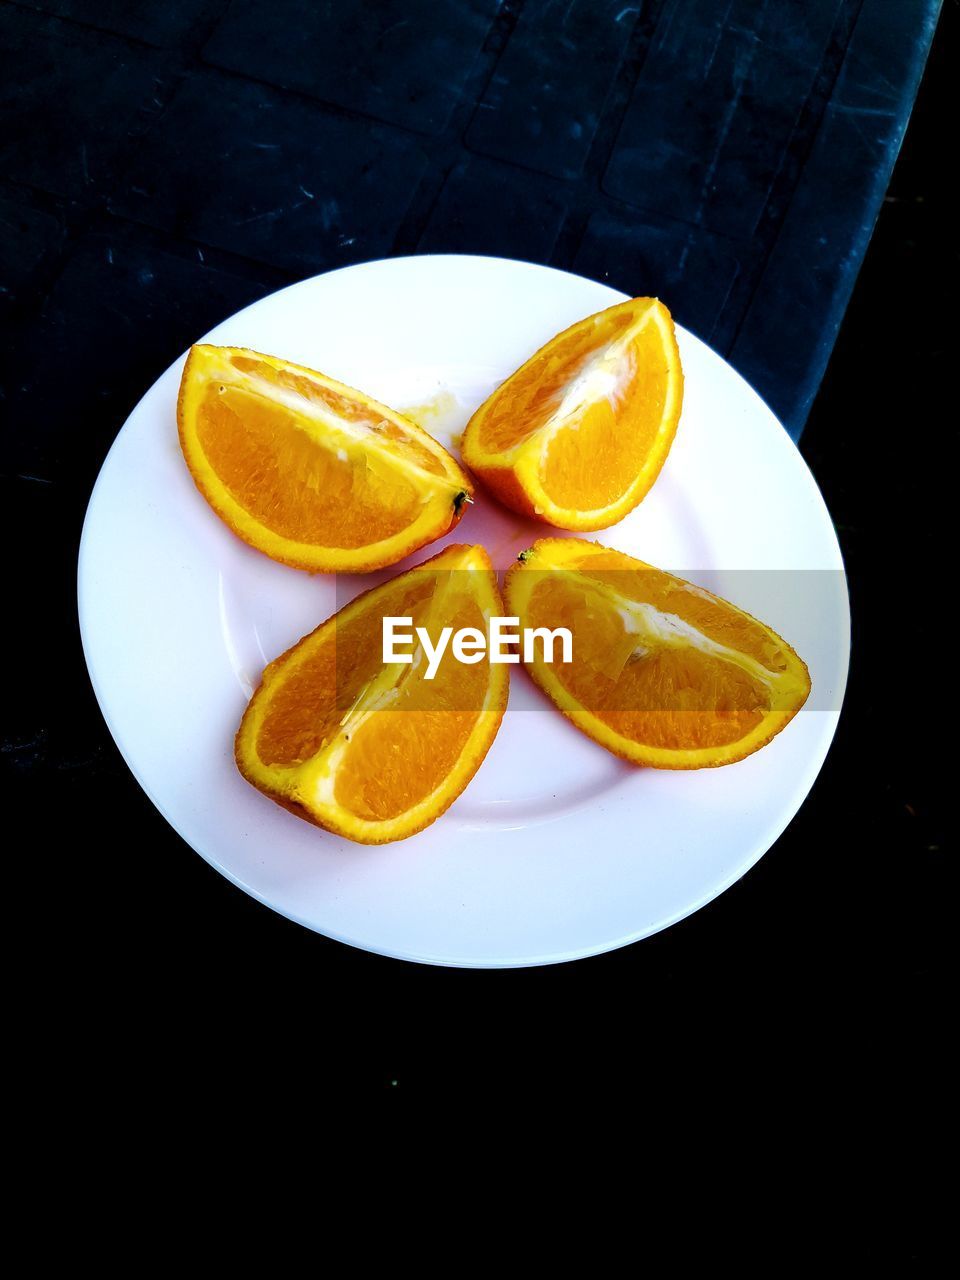 HIGH ANGLE VIEW OF ORANGE FRUIT IN PLATE